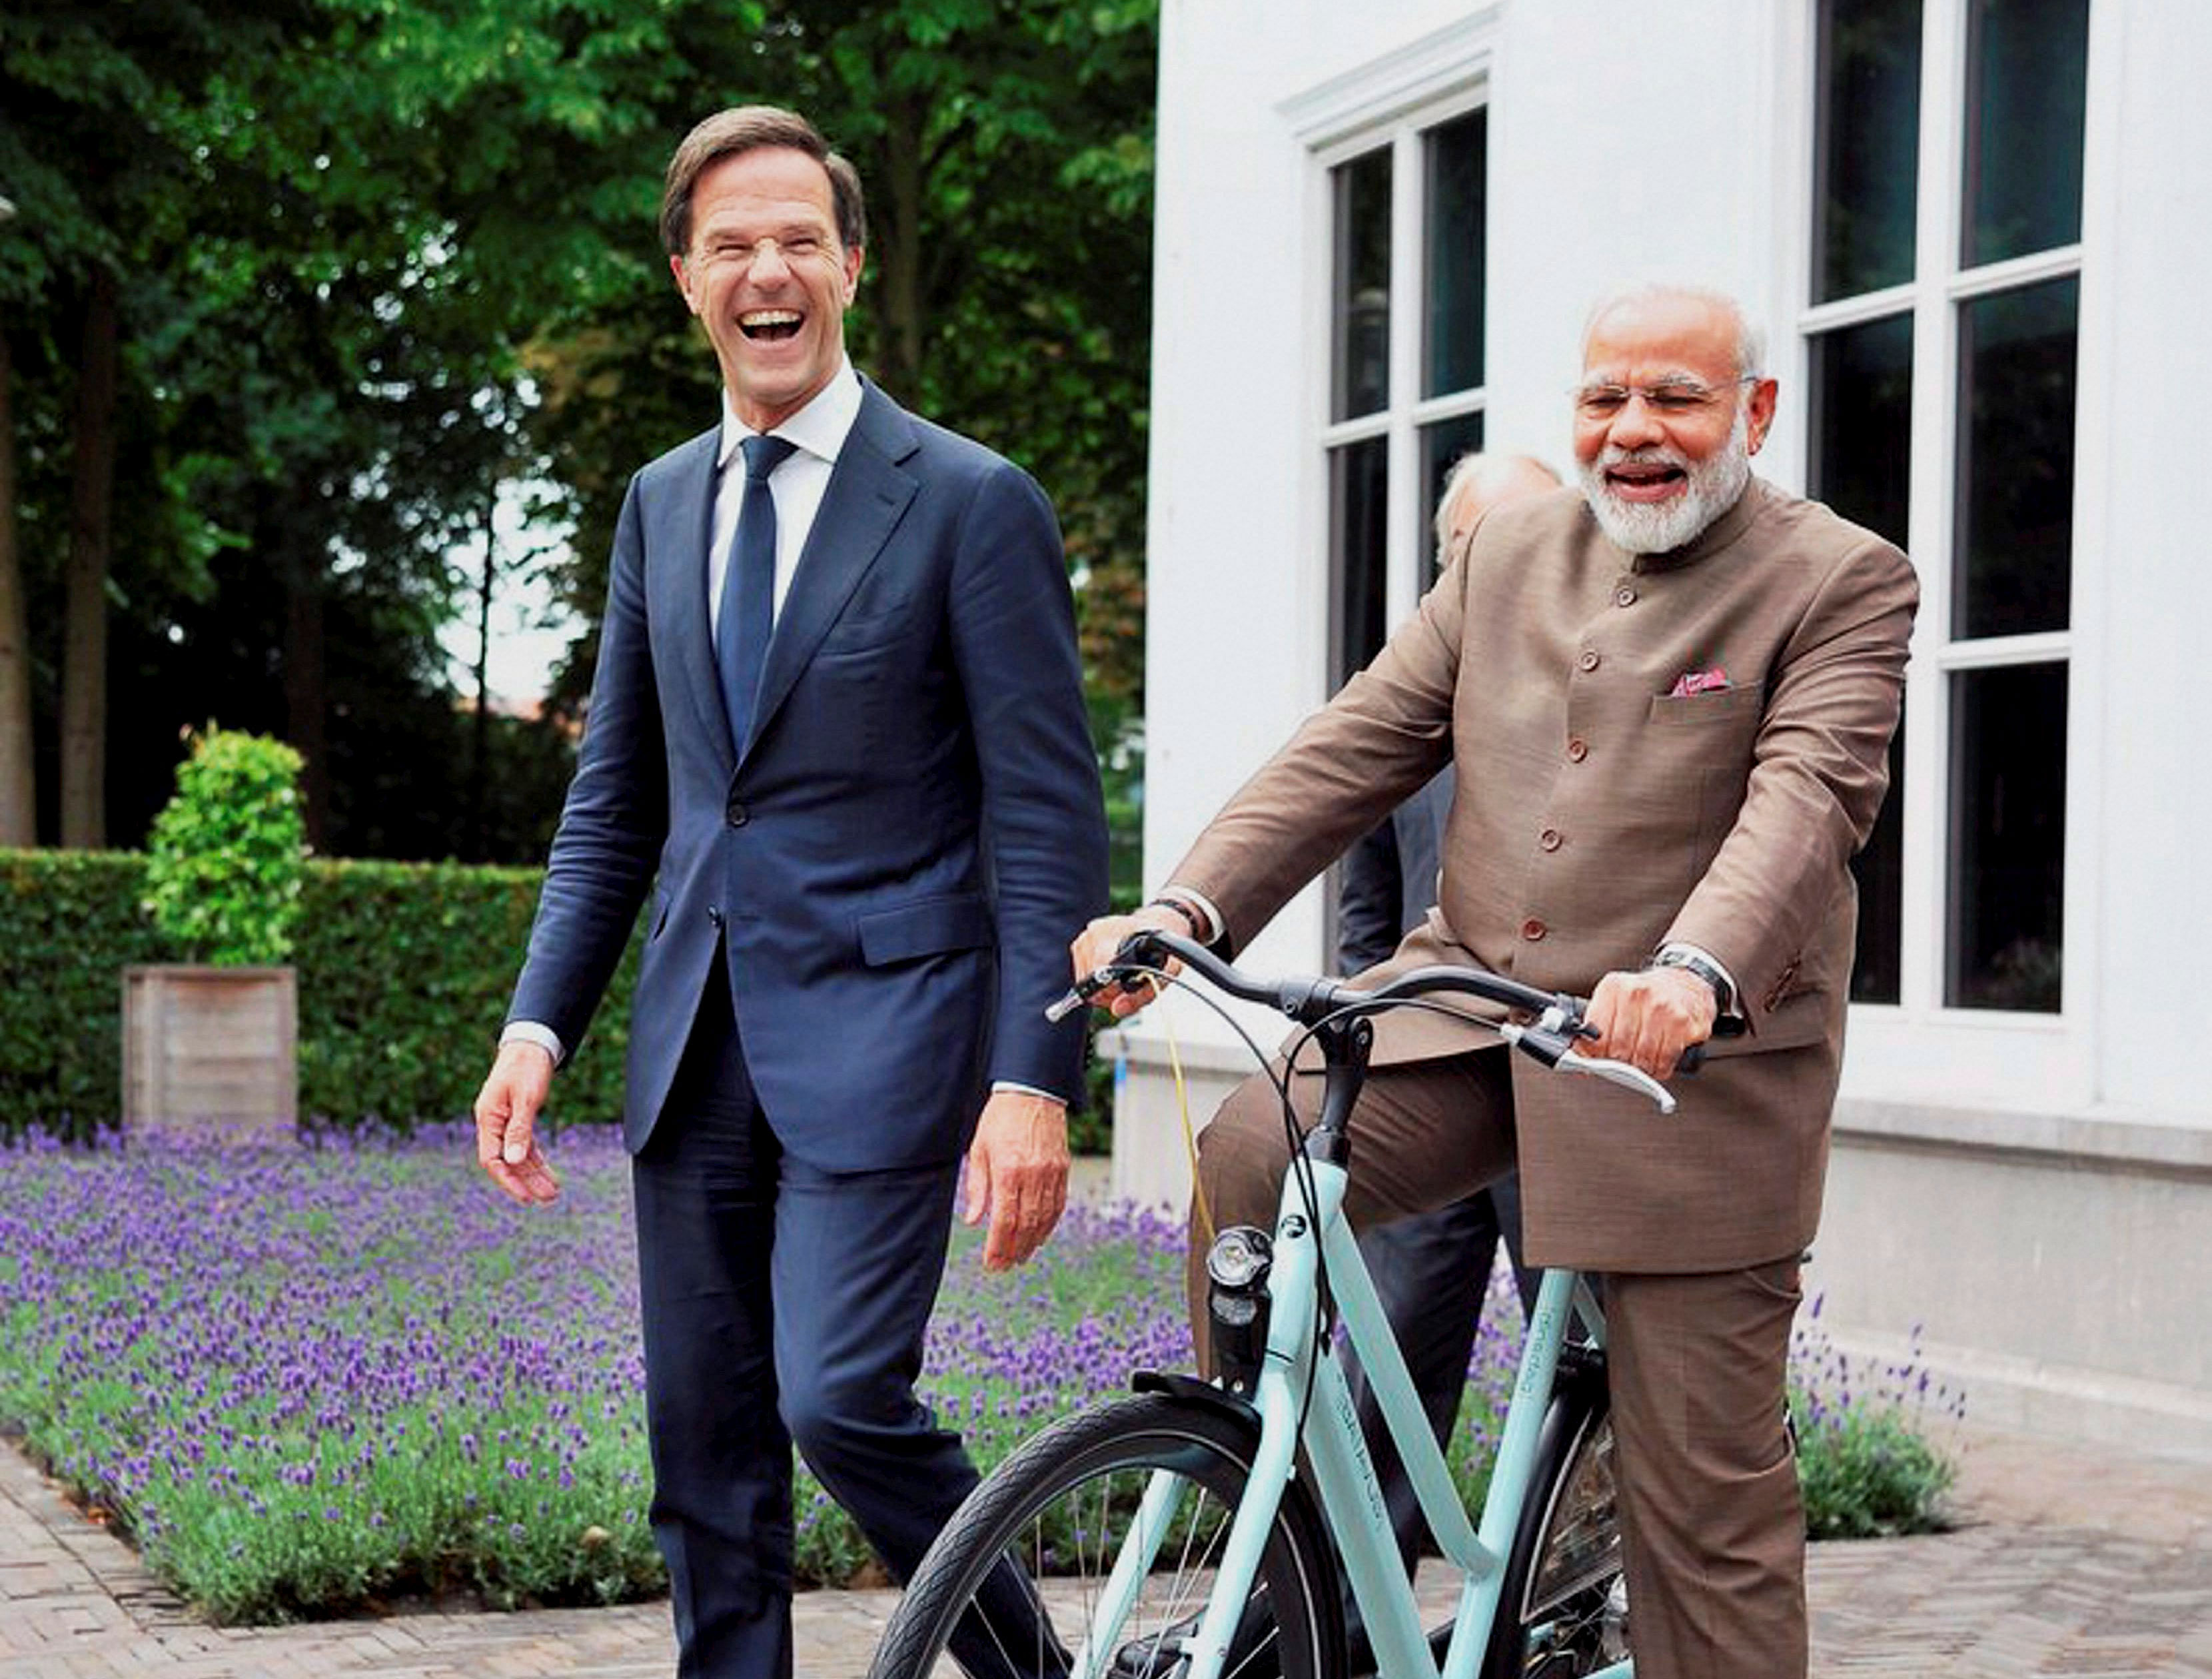 A picture shared by Prime Minister Modi on his twitter account shows him sitting and smiling on the Dutch-made bicycle which was gifted to him by Rutte yesterday. PTI photo